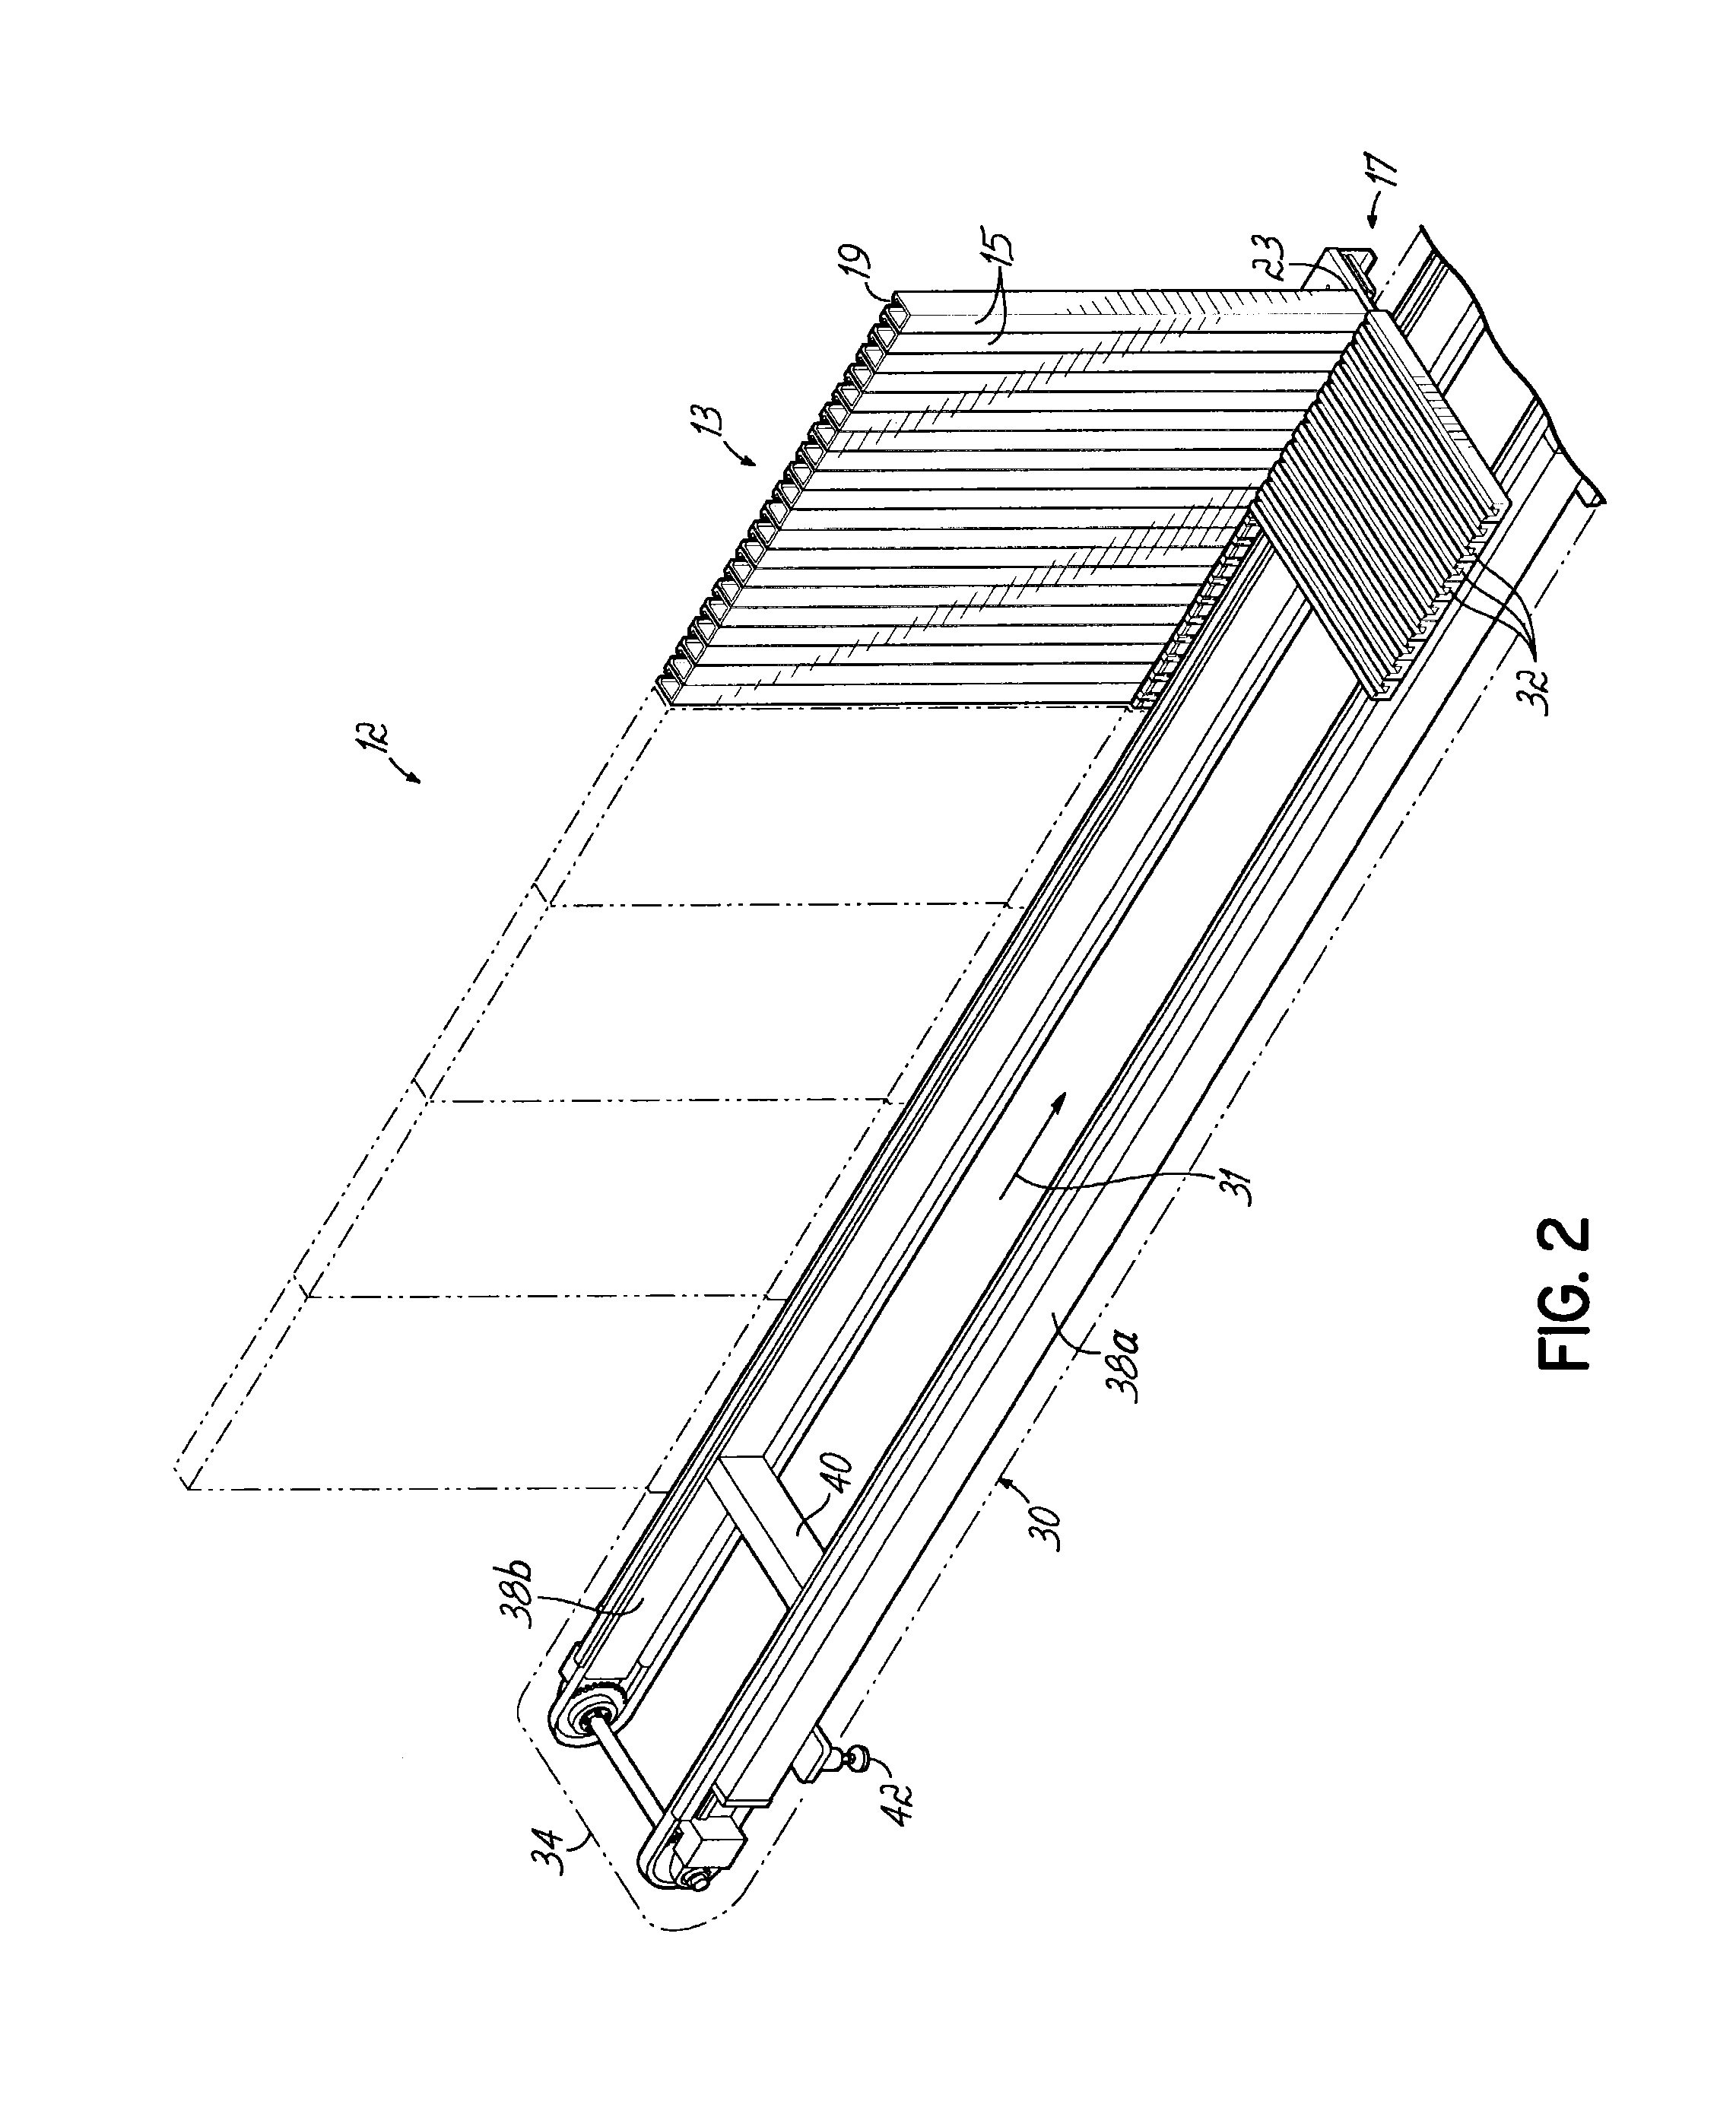 Pharmaceutical dispensing system and associated method